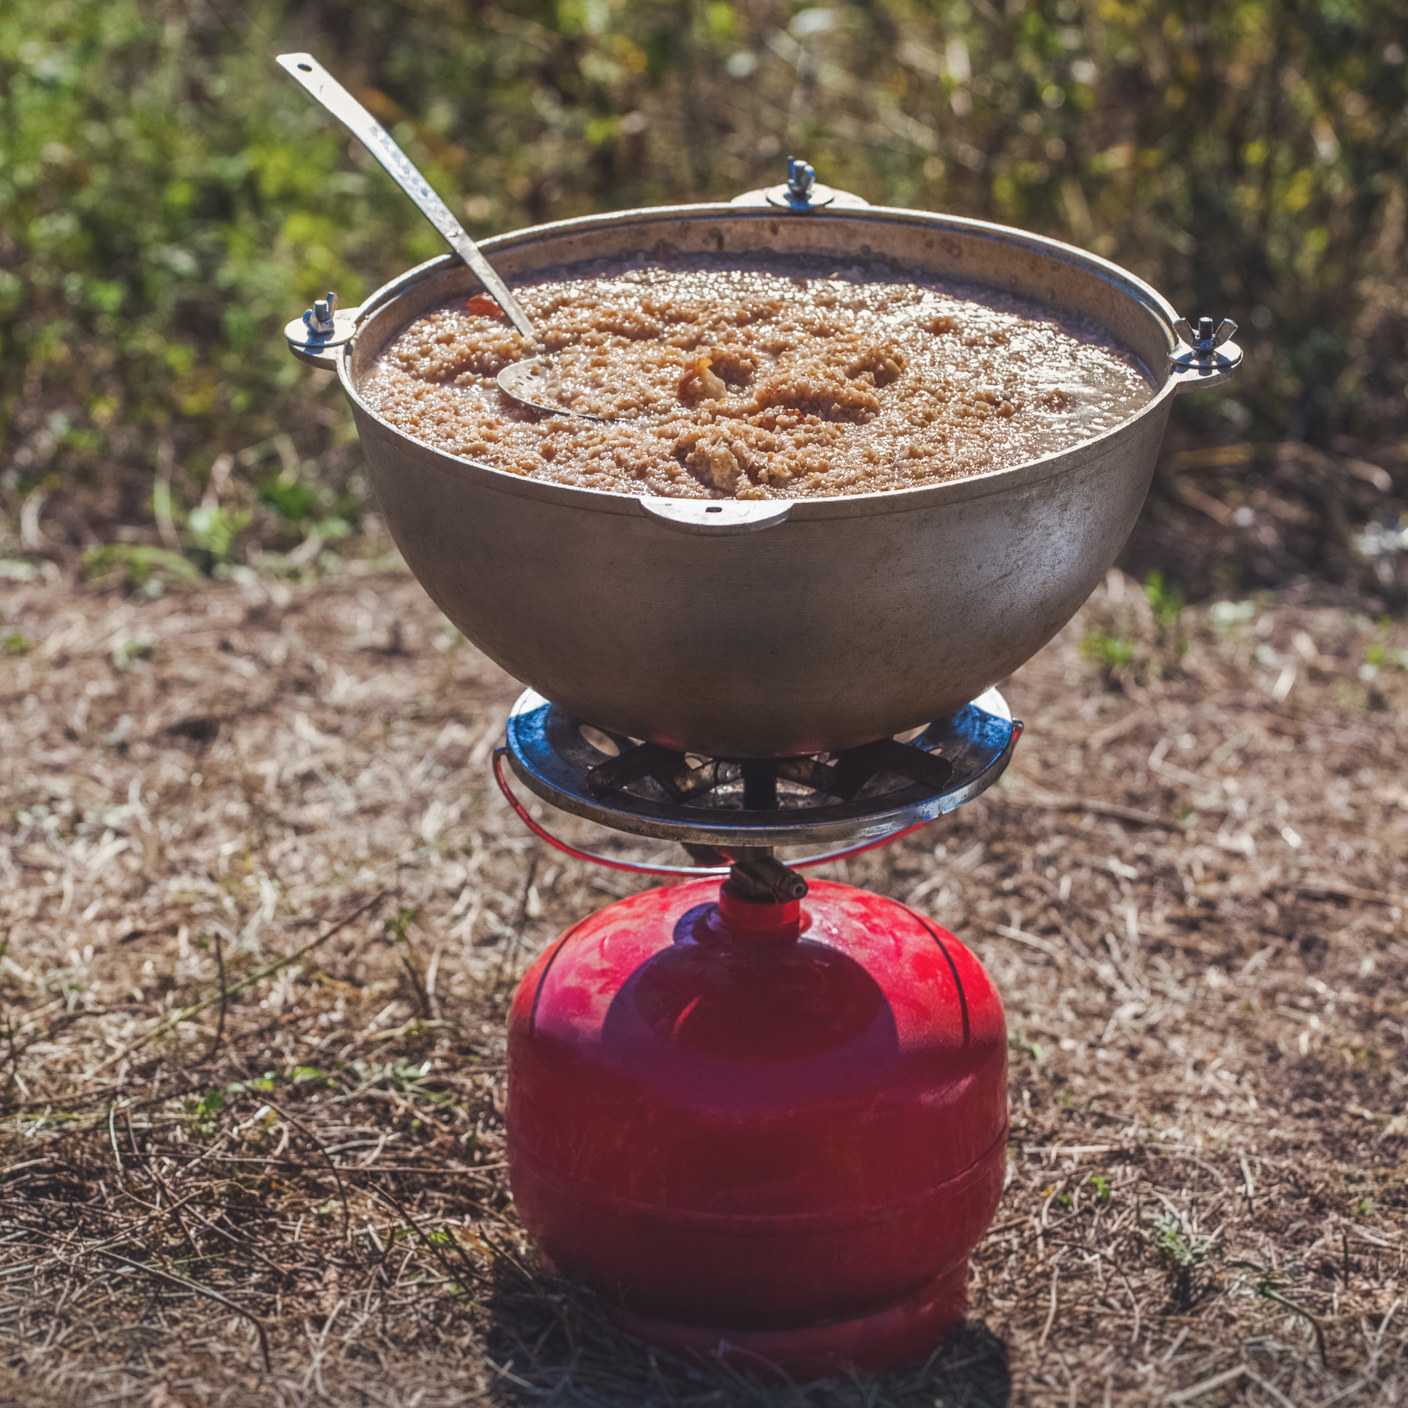 pot of porridge cooking on a gas burner surrounded by nature